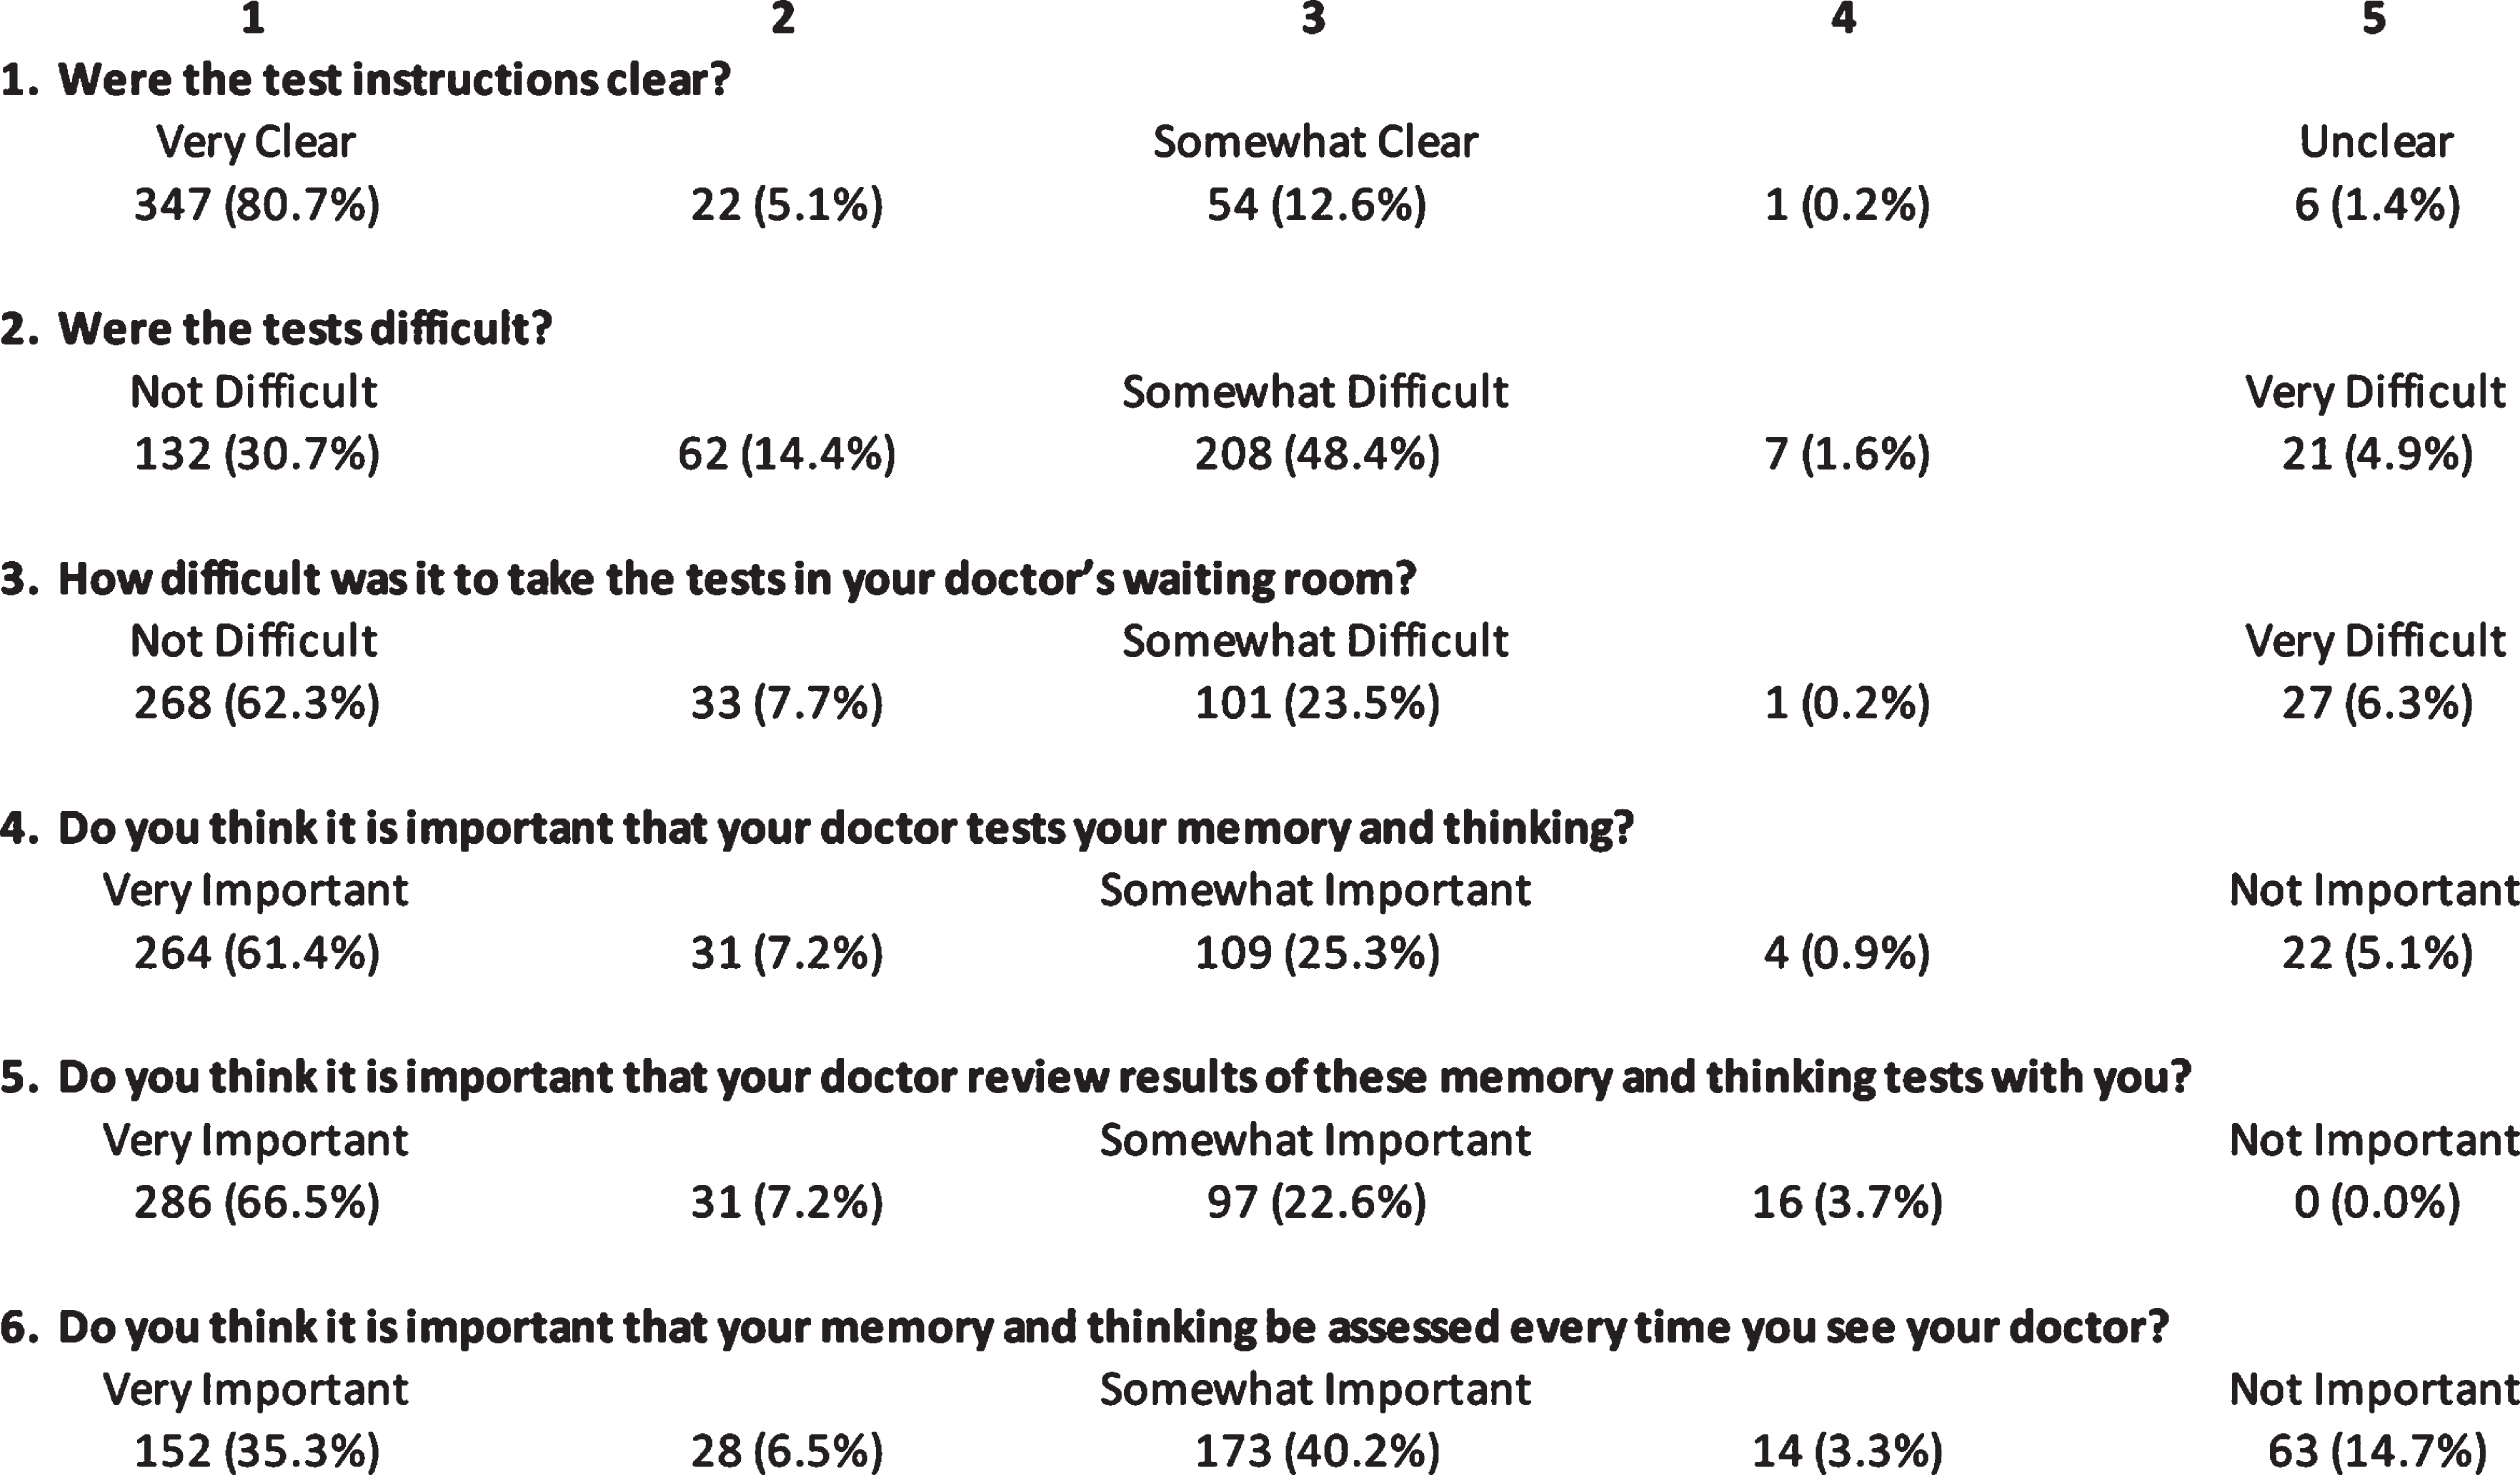 Results of a patient survey consisting of six 5-point Likert scale questions.